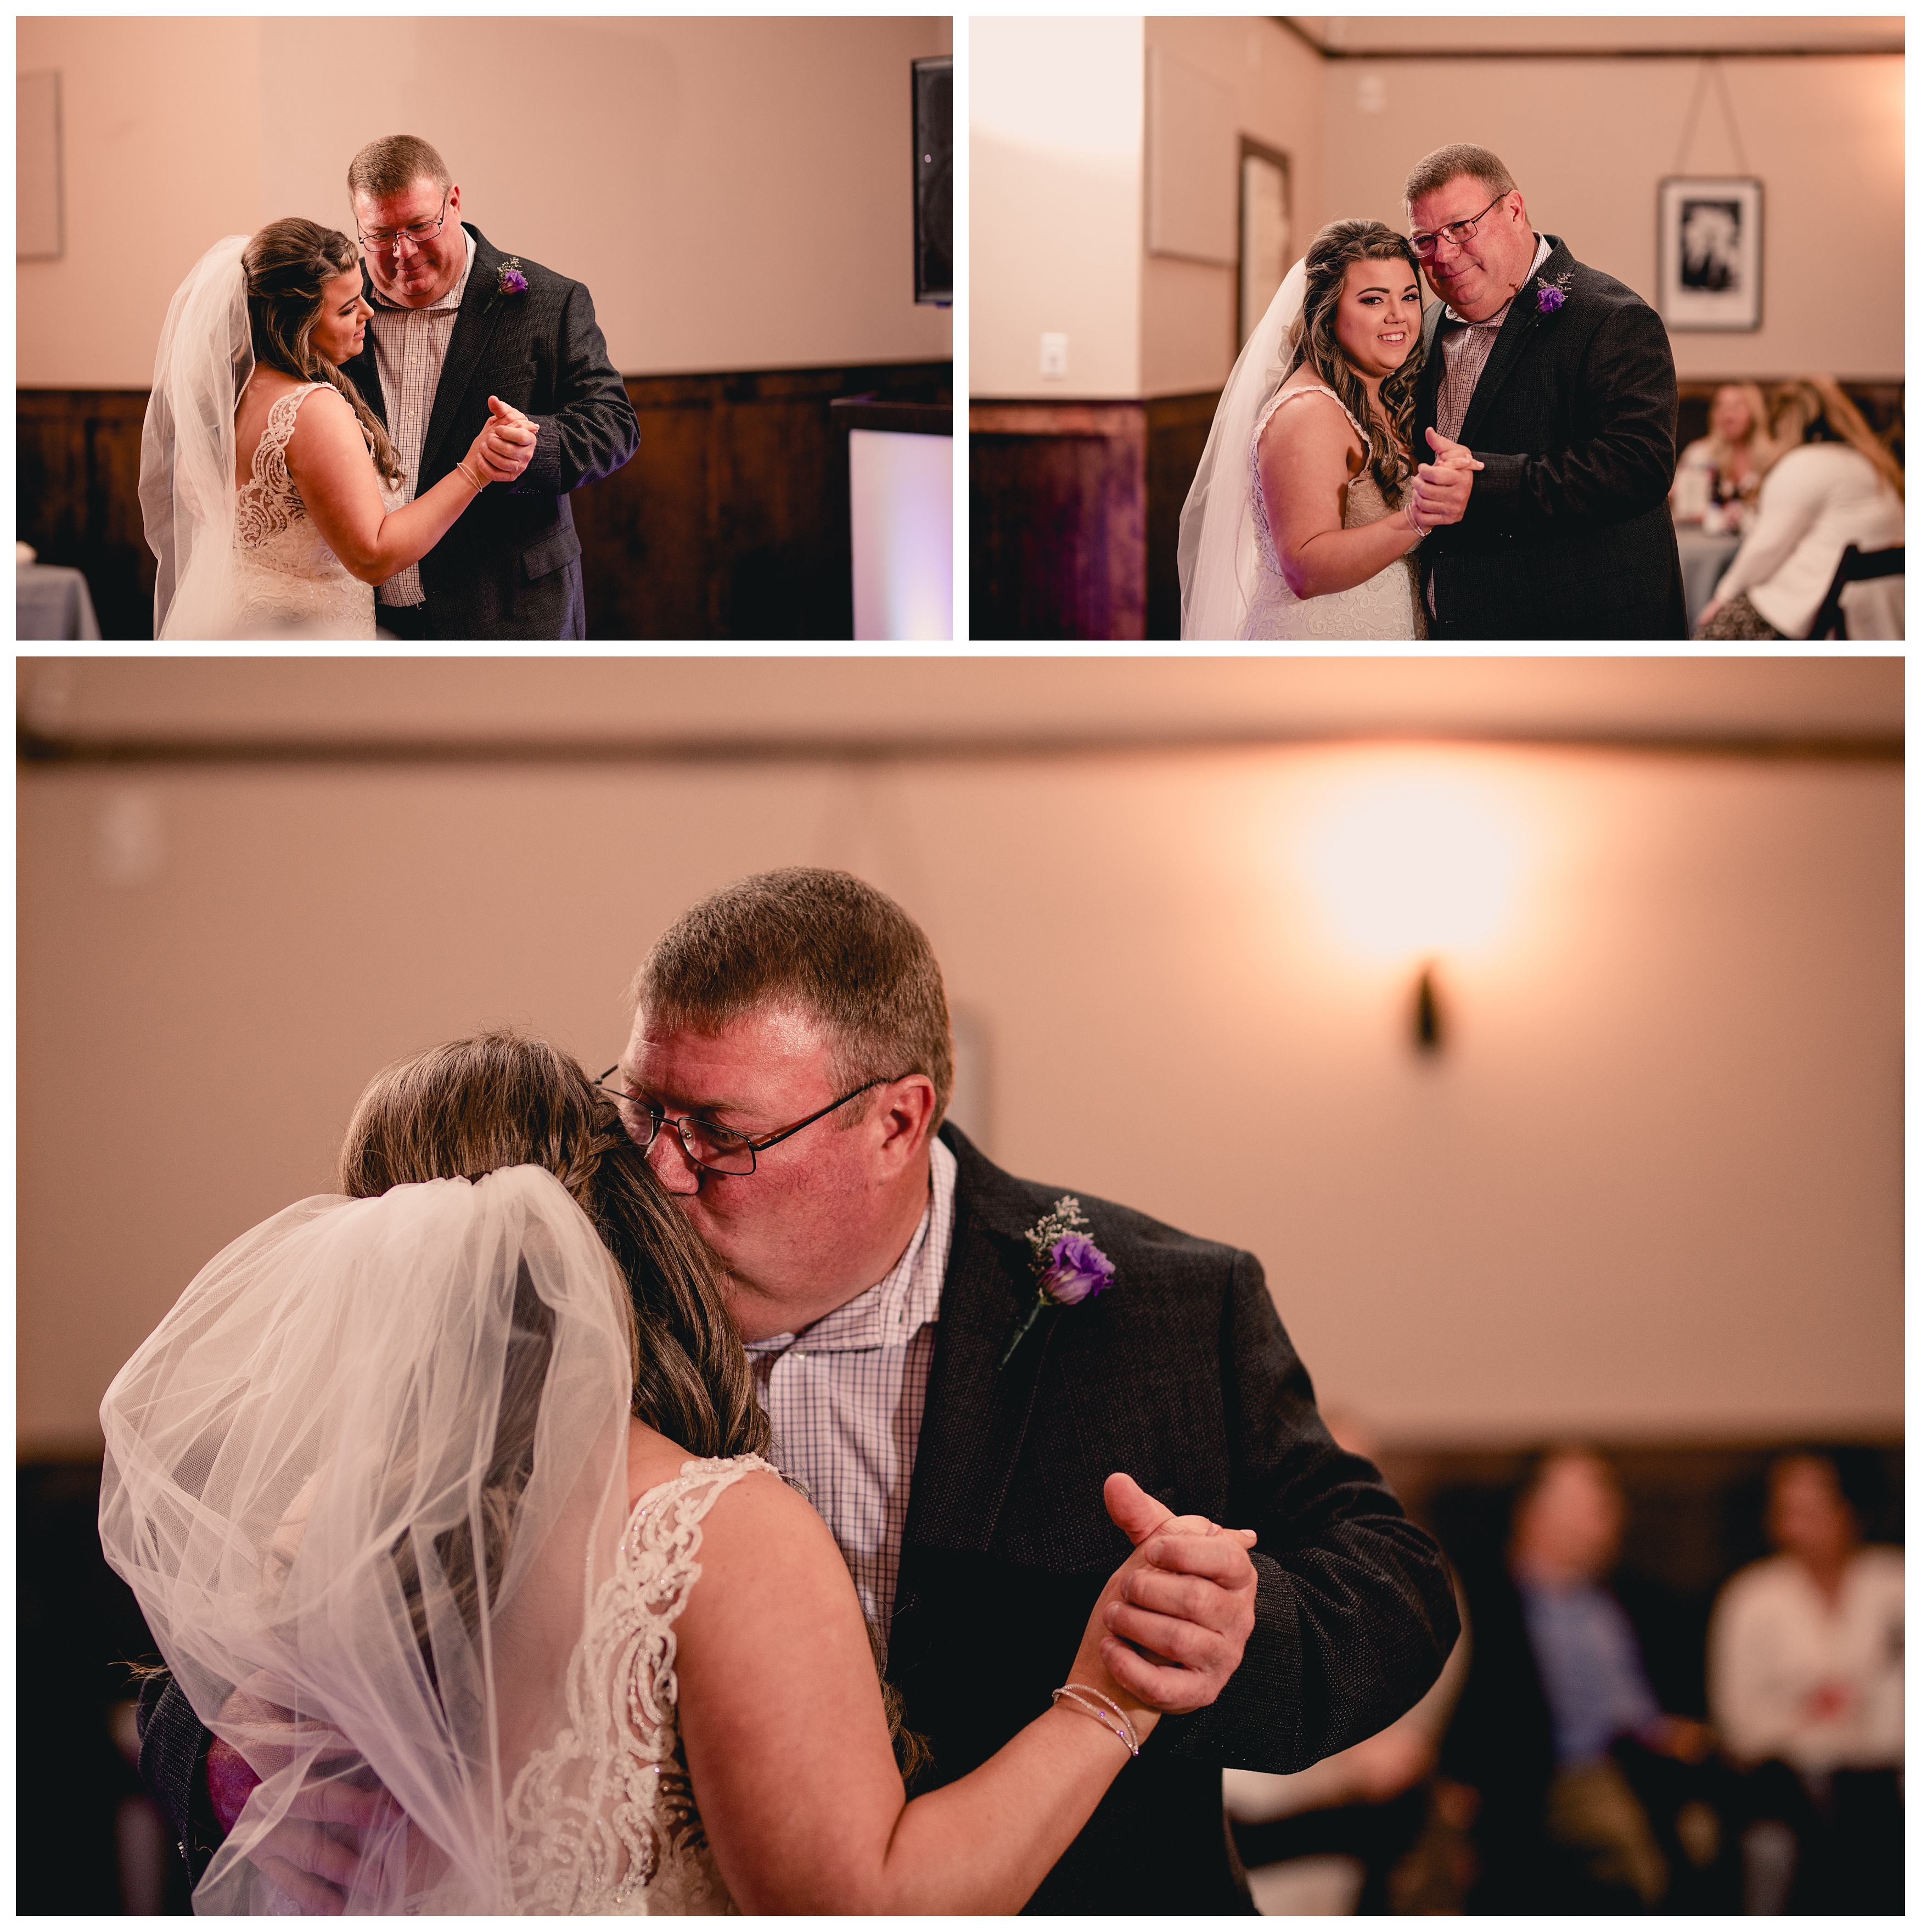 Father daughter first dance on bride's wedding day. Bradley's Pond, Tallahassee, Florida. Shelly Williams Photography